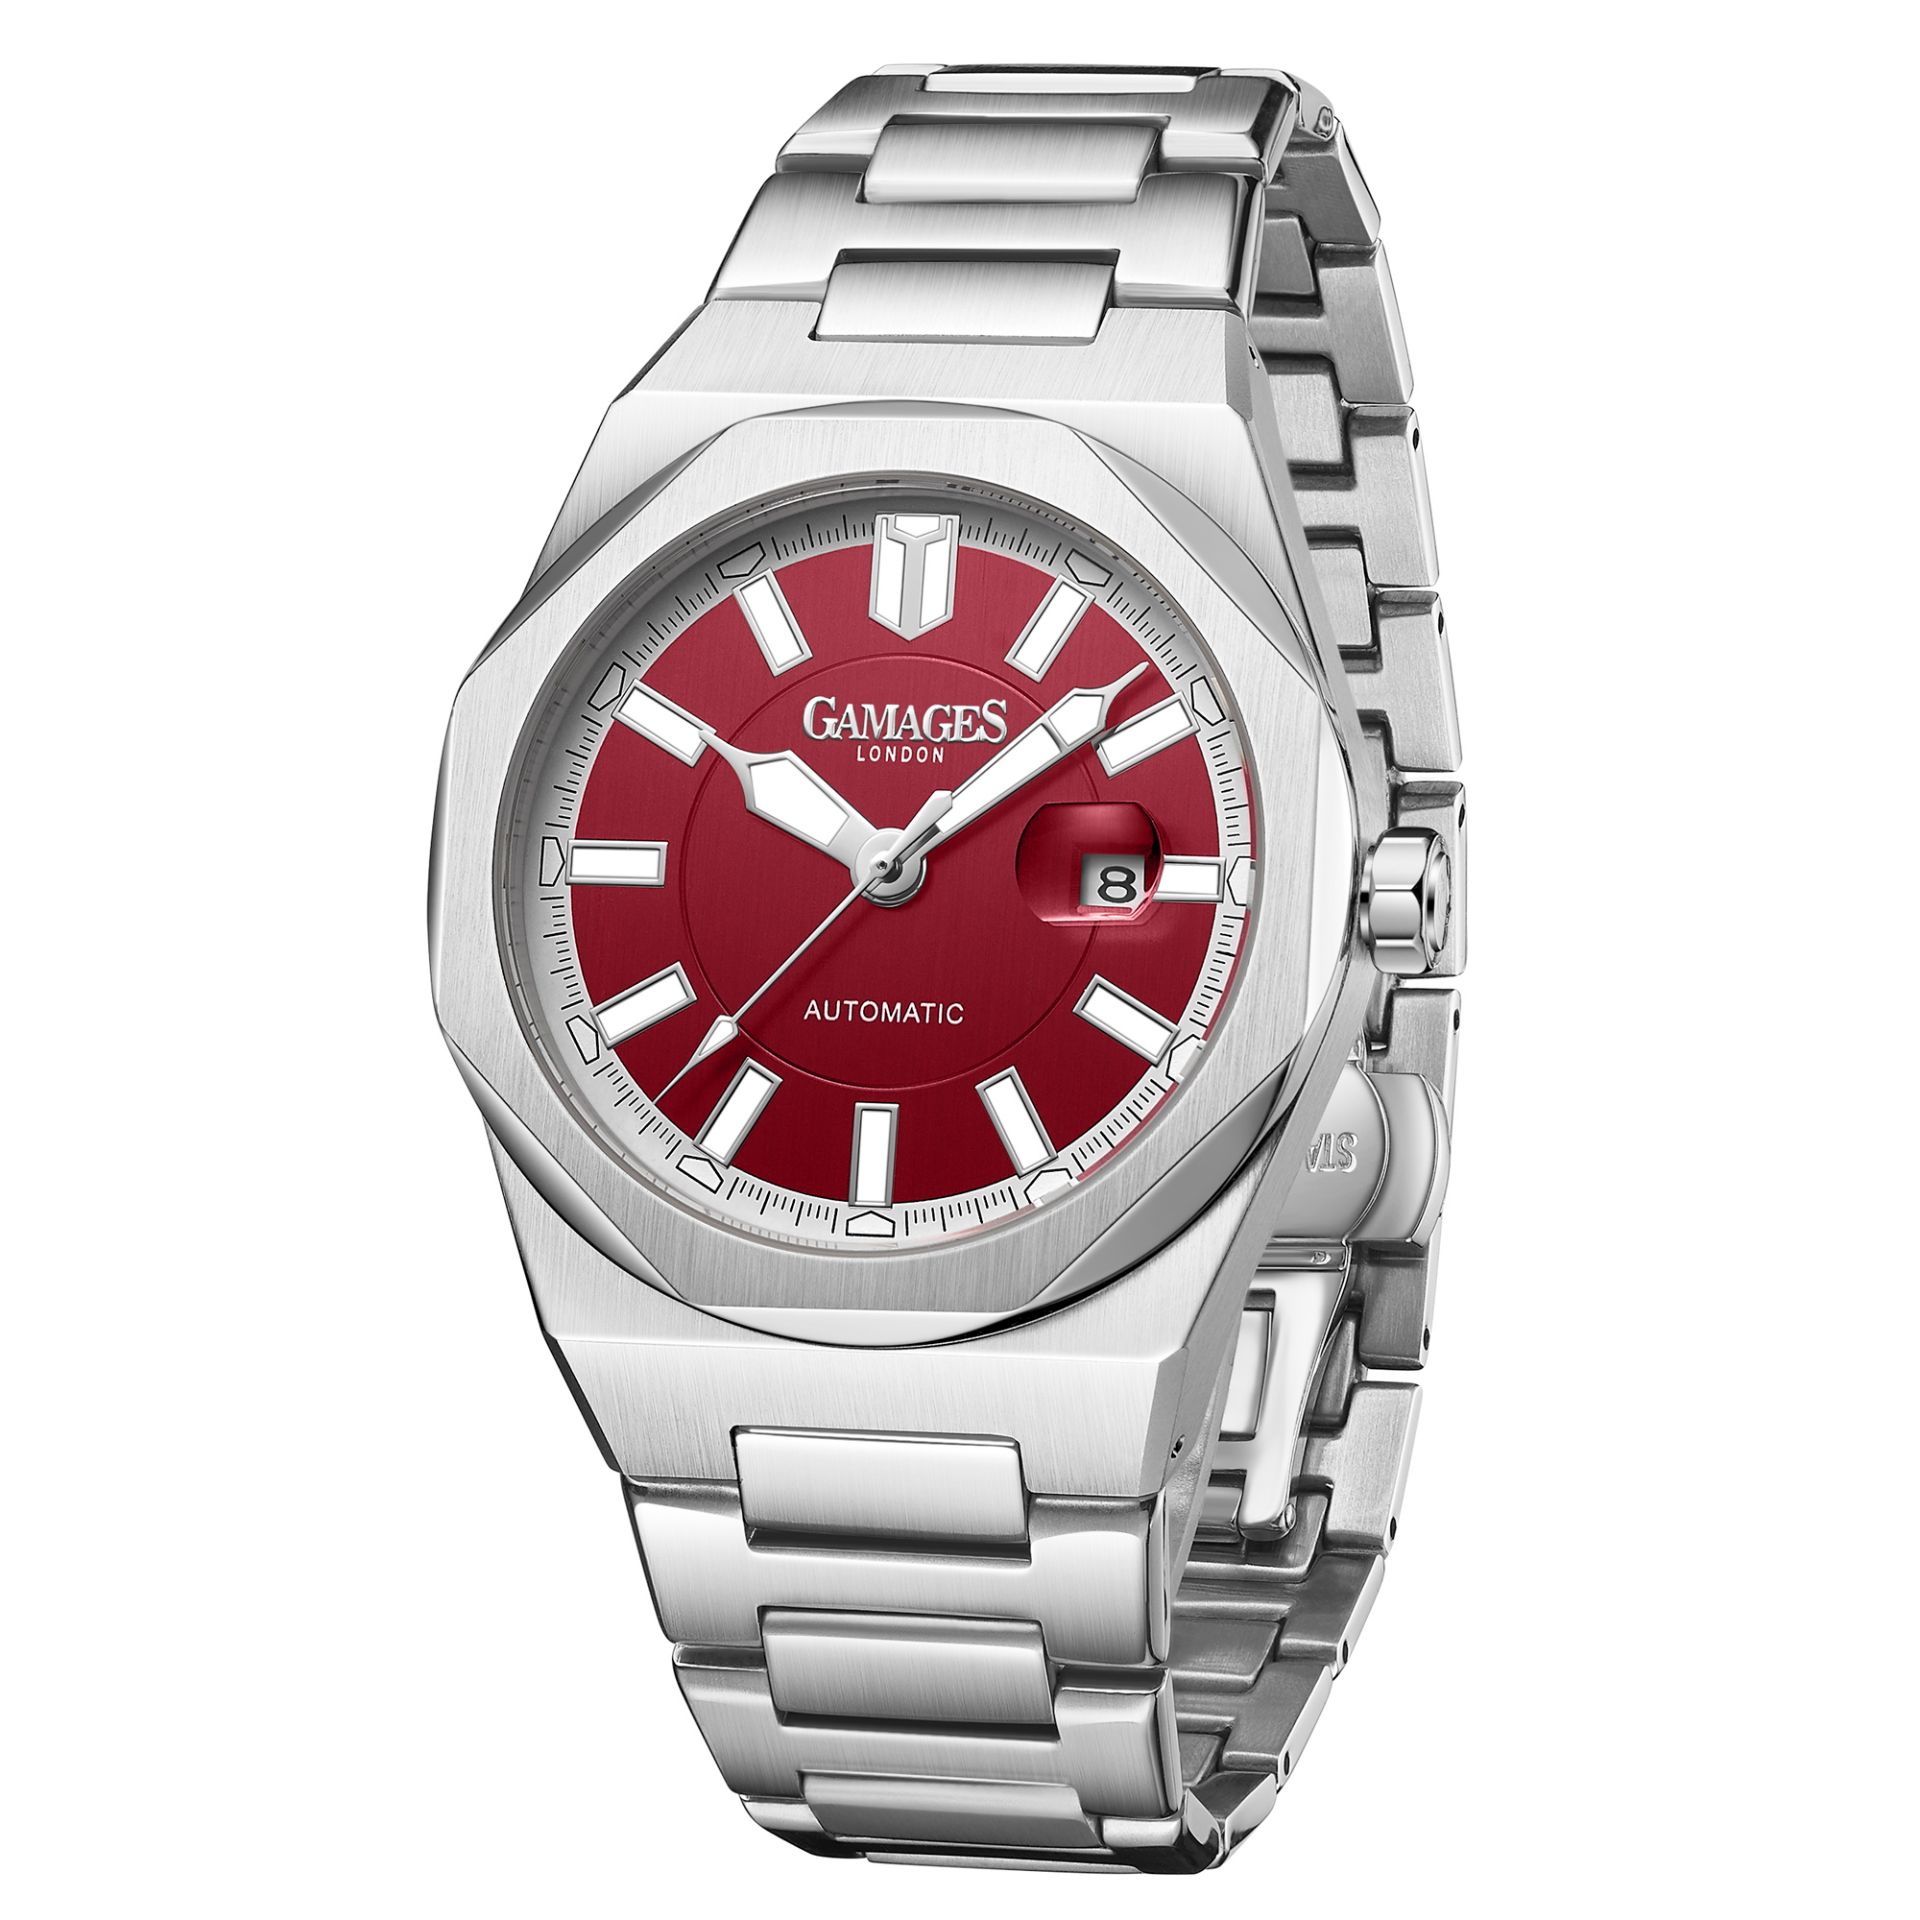 Ltd Edition Hand Assembled GAMAGES Quintessential Automatic Red – 5 Year Warranty & Free Delivery - Image 4 of 5